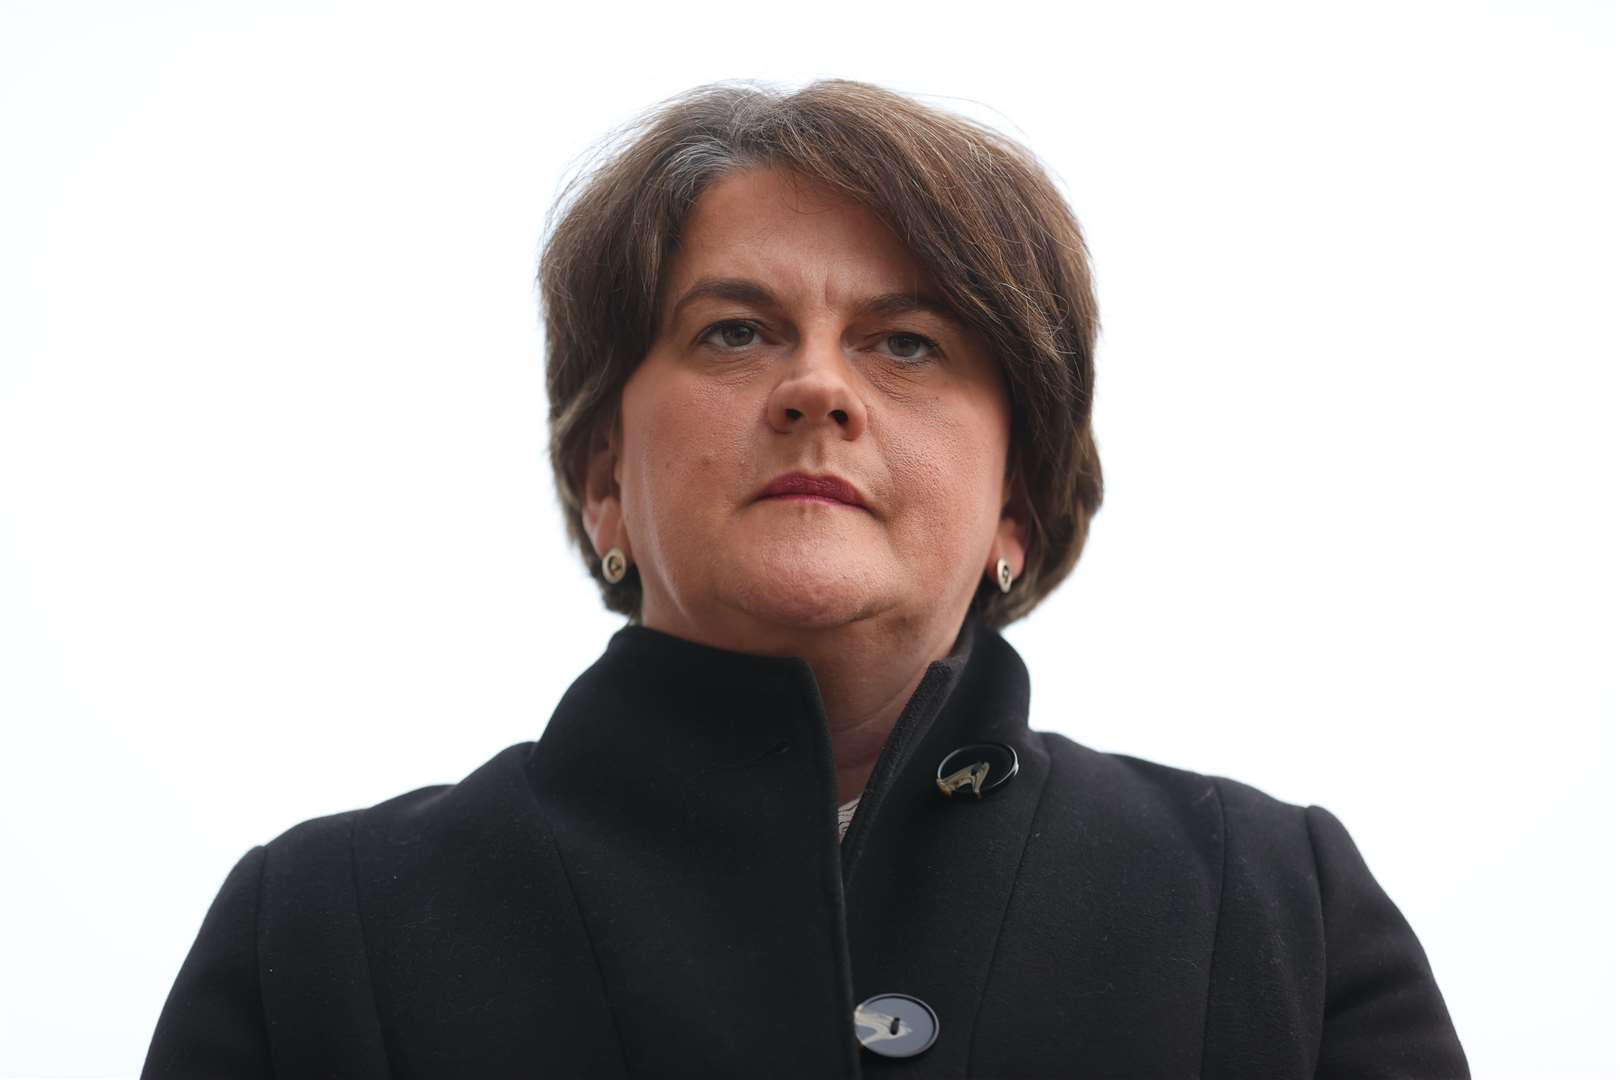 Northern Ireland First Minister Arlene Foster has claimed the protocol is disproportionate and excessive (Liam McBurney/PA)